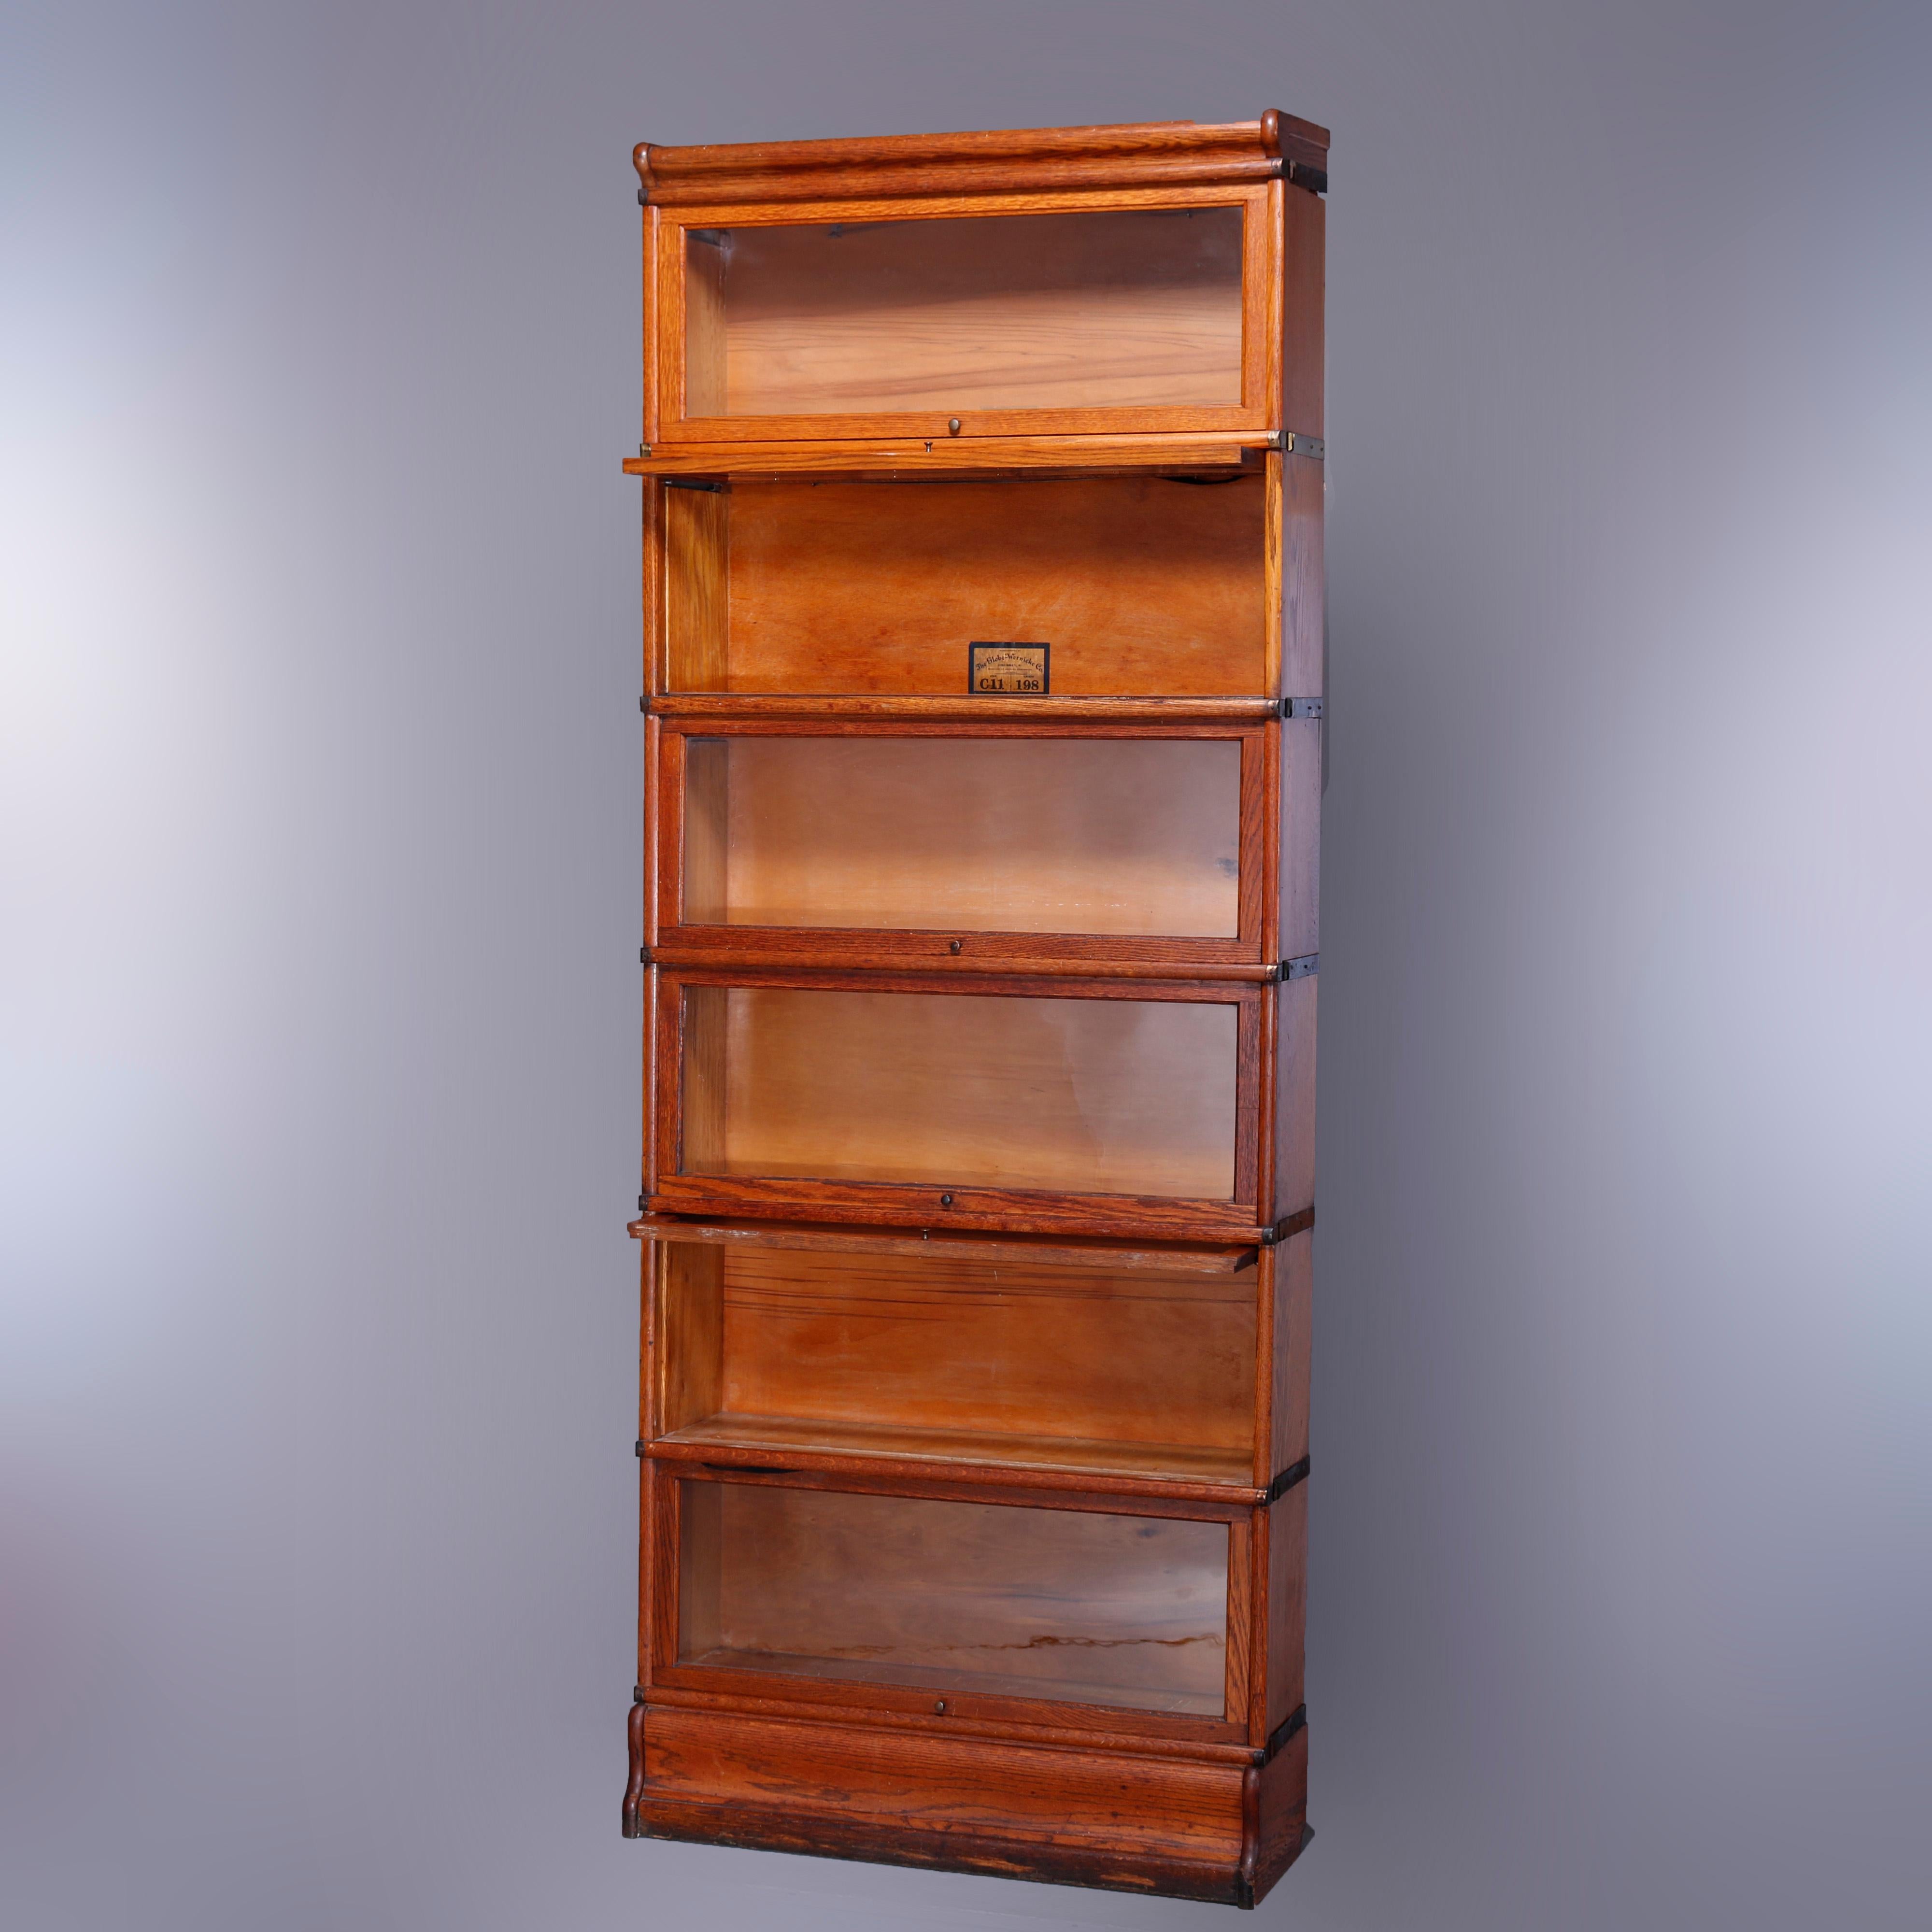 An antique Arts & Crafts barrister bookcase by Globe Wernicke offers quarter sawn oak construction with six stacks, each with pull-out glass doors, raised on ogee base, original labels as photographed, c1910

Measures - 88.25'' H x 34'' W x 11'' D;